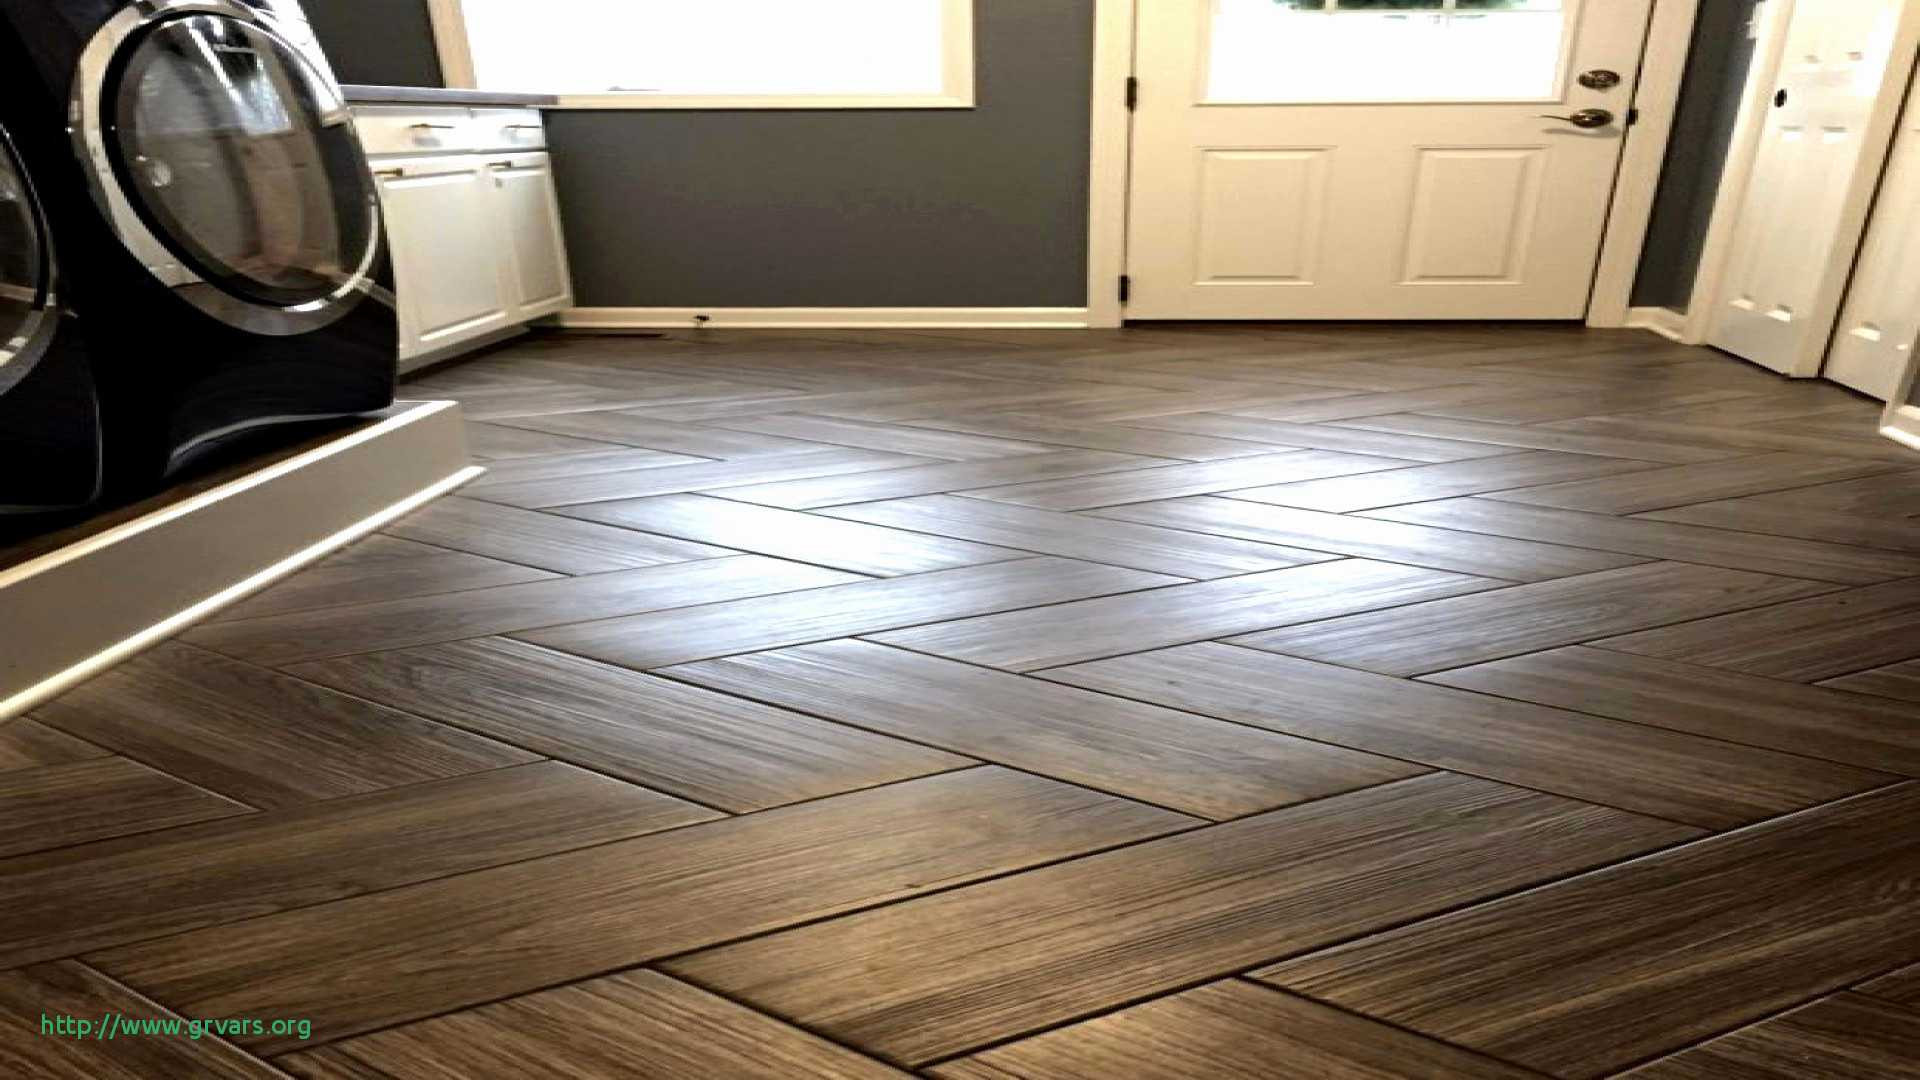 27 Famous Home Depot Hickory Hardwood Flooring 2024 free download home depot hickory hardwood flooring of 16 ac289lagant hardwood flooring depot calgary ideas blog with regard to hardwood flooring depot calgary unique wood and tile floor cork flooring in a